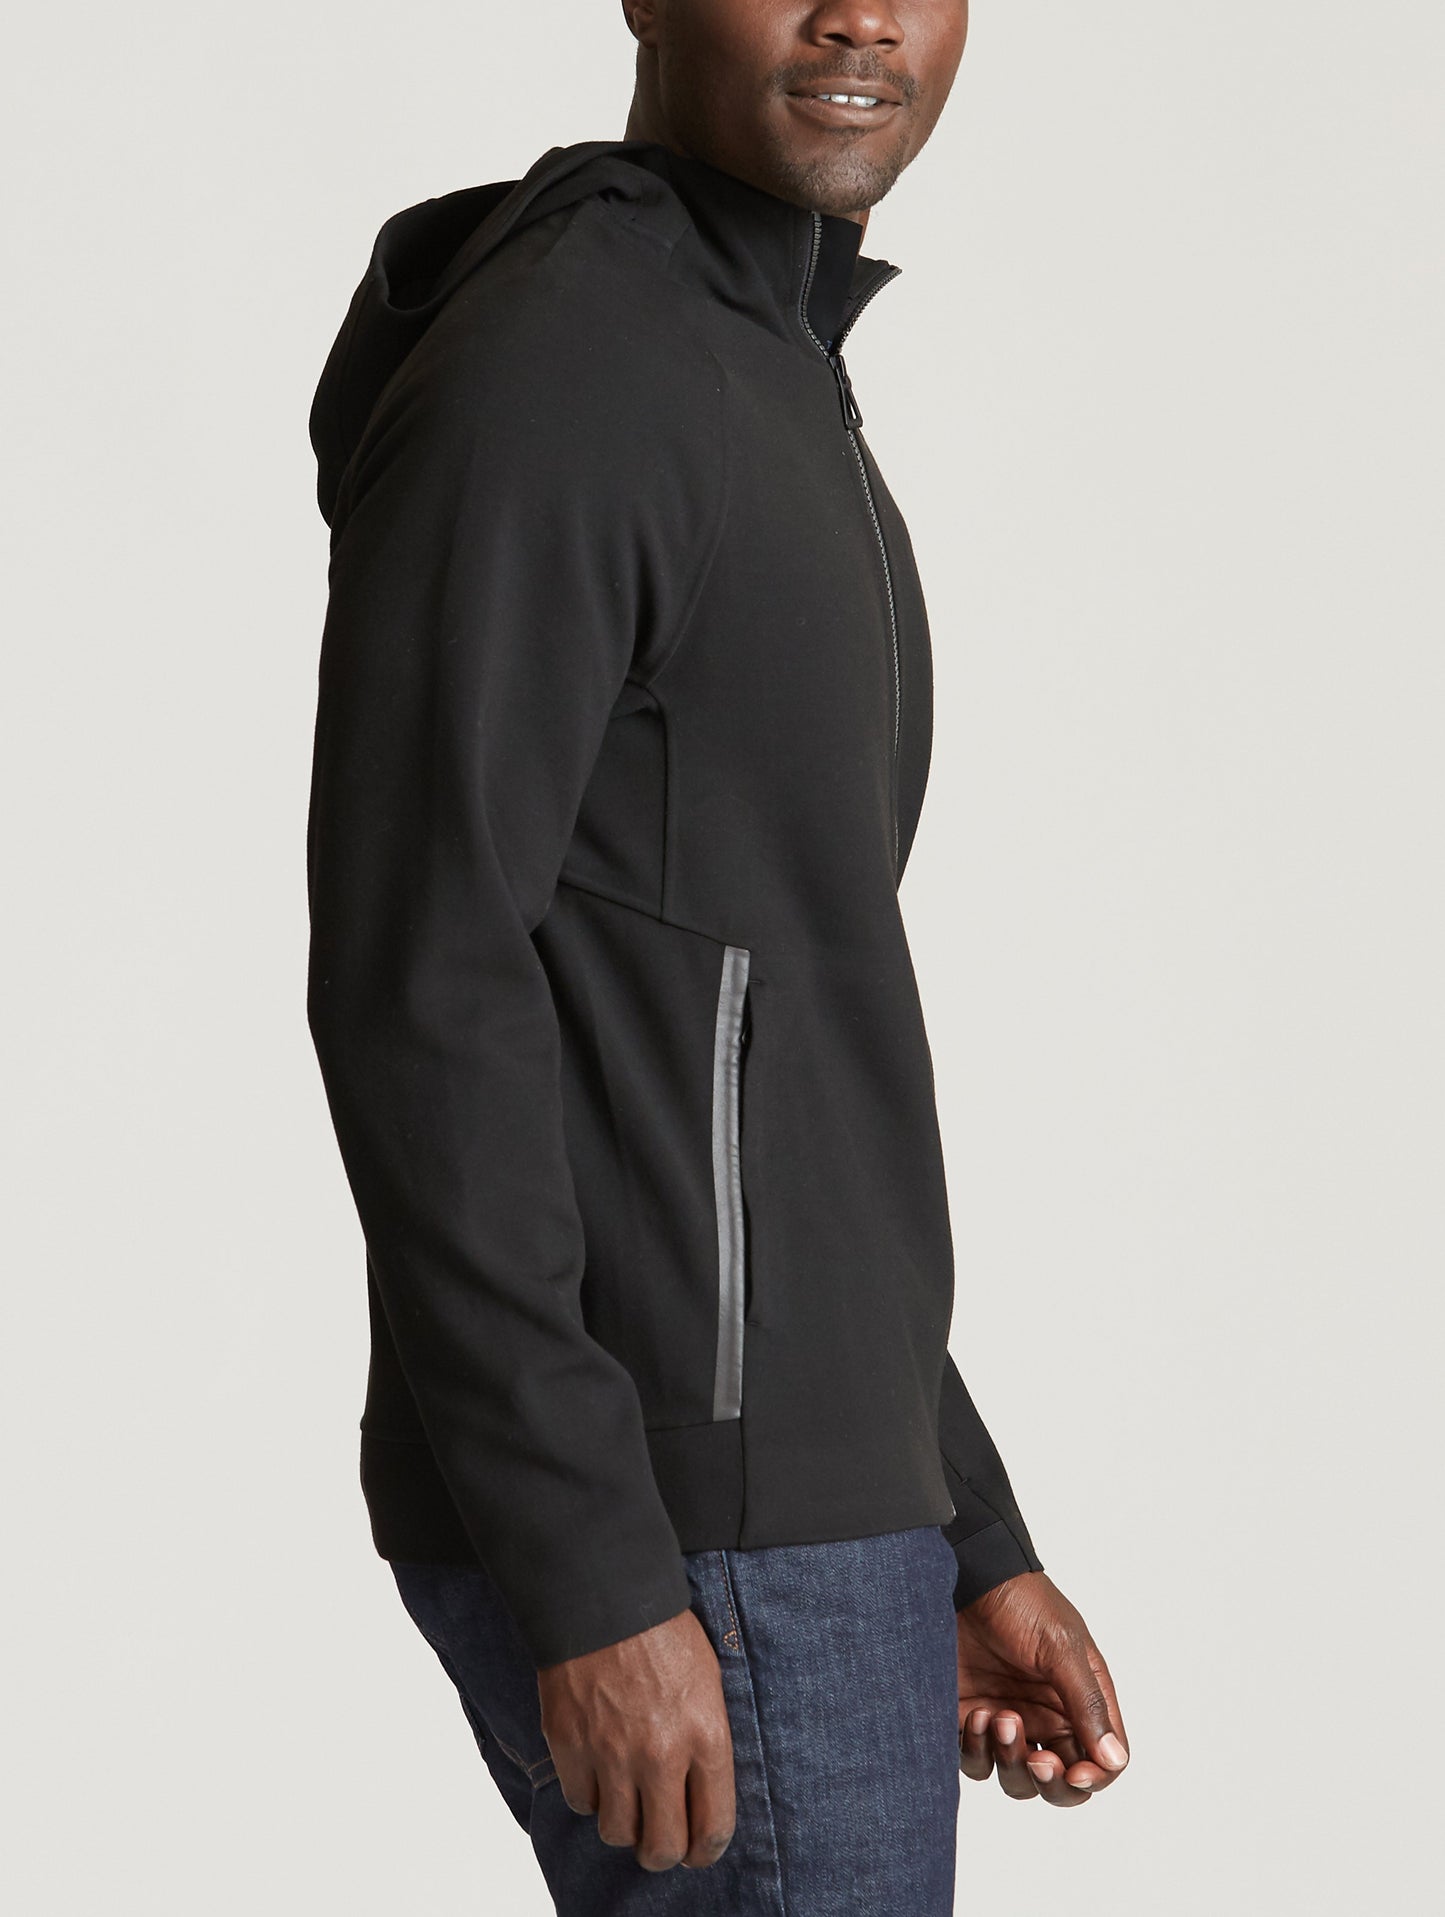 hoodie for men from Aether Apparel